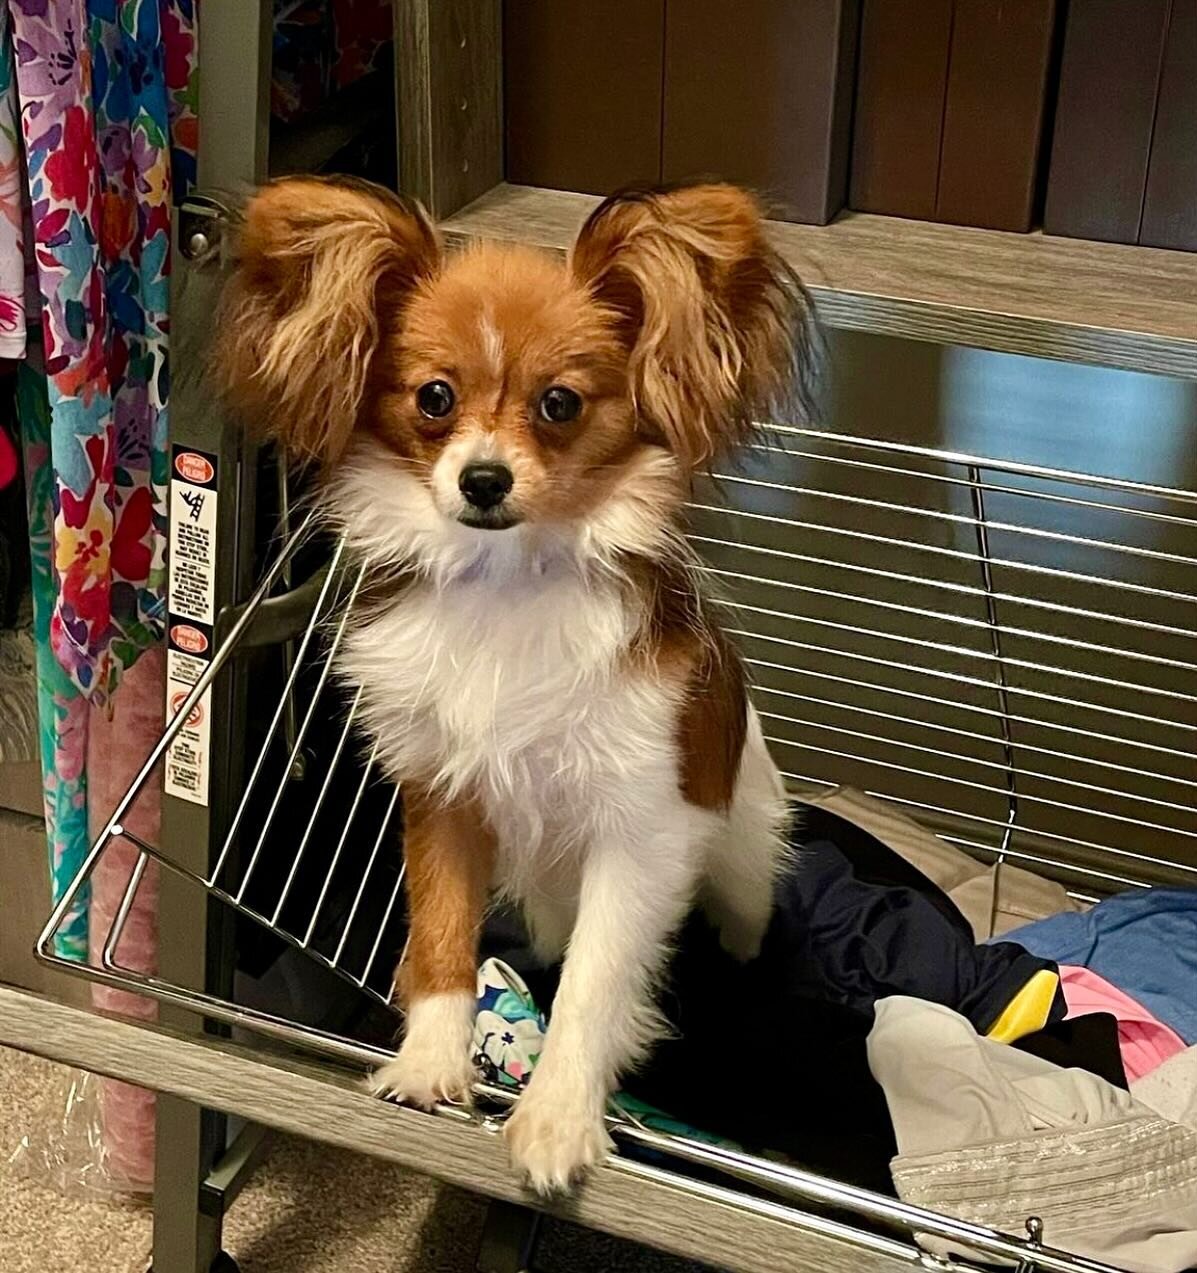 Too cute to not share, thank you @stephspillane4 This is Lucy from Peach and Luciano 🥰 #papillon #papillons #papillonsofinstagram #papillonlove #puppylove #puppylife #puppiesofinstagram #puppiesofinsta #papillonpuppies #puplife #sablewings